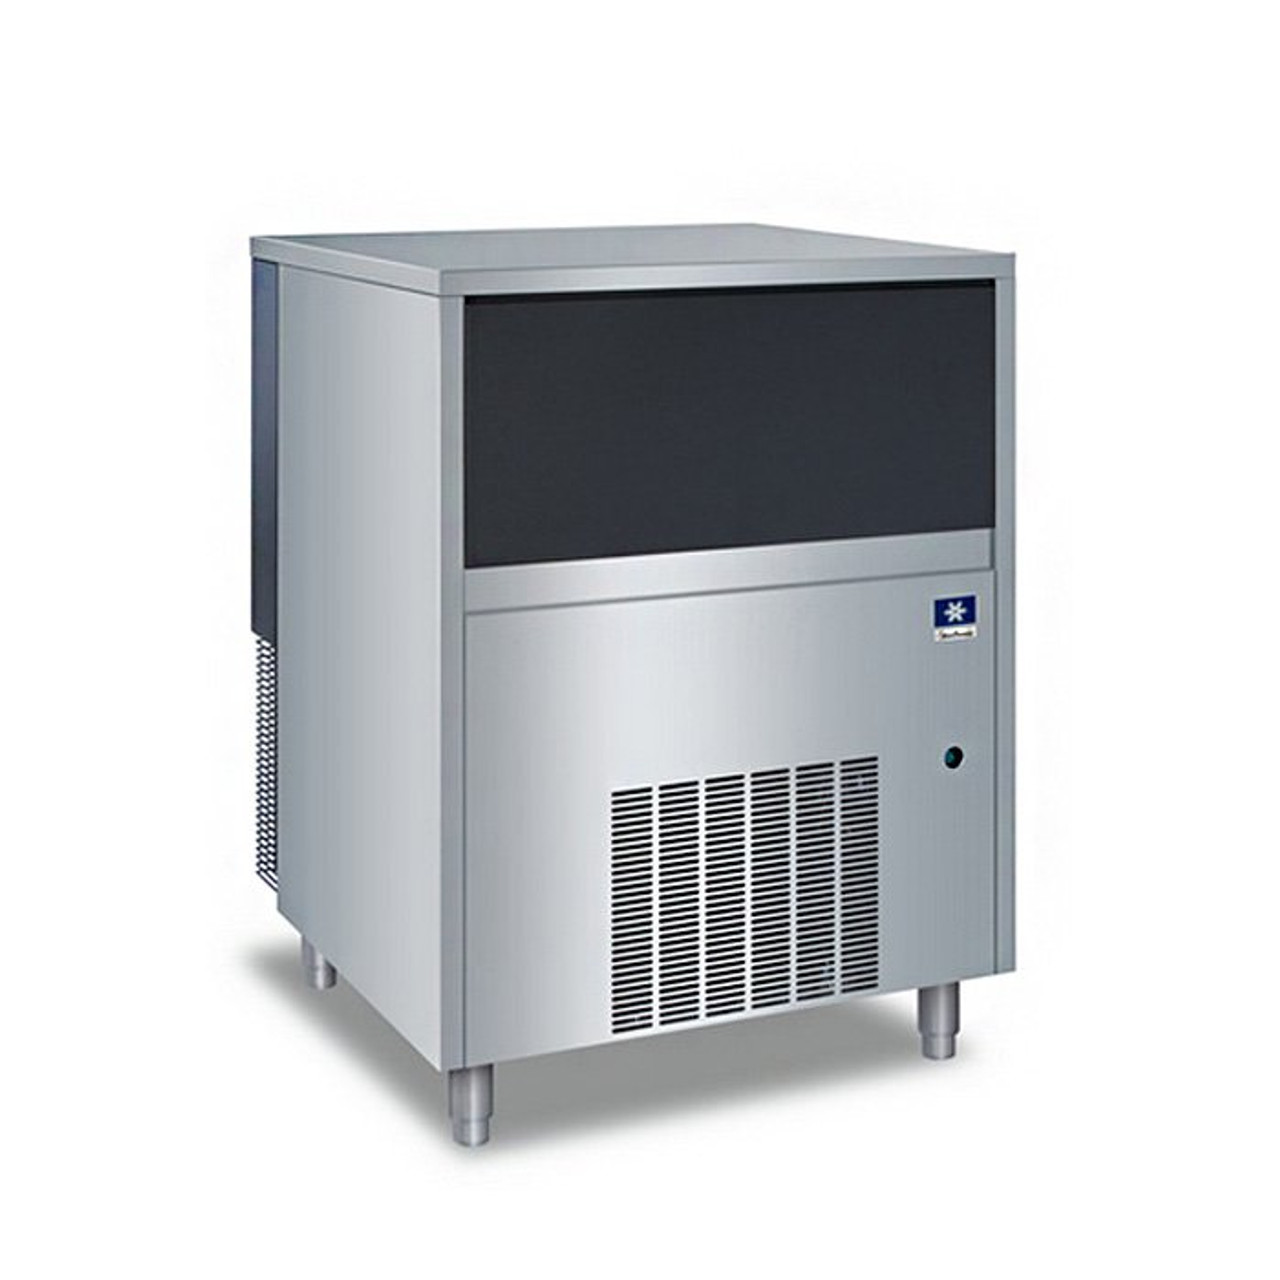 Manitowoc UNF-0300A-161 - 300 lbs Undercounter Nugget Ice Maker